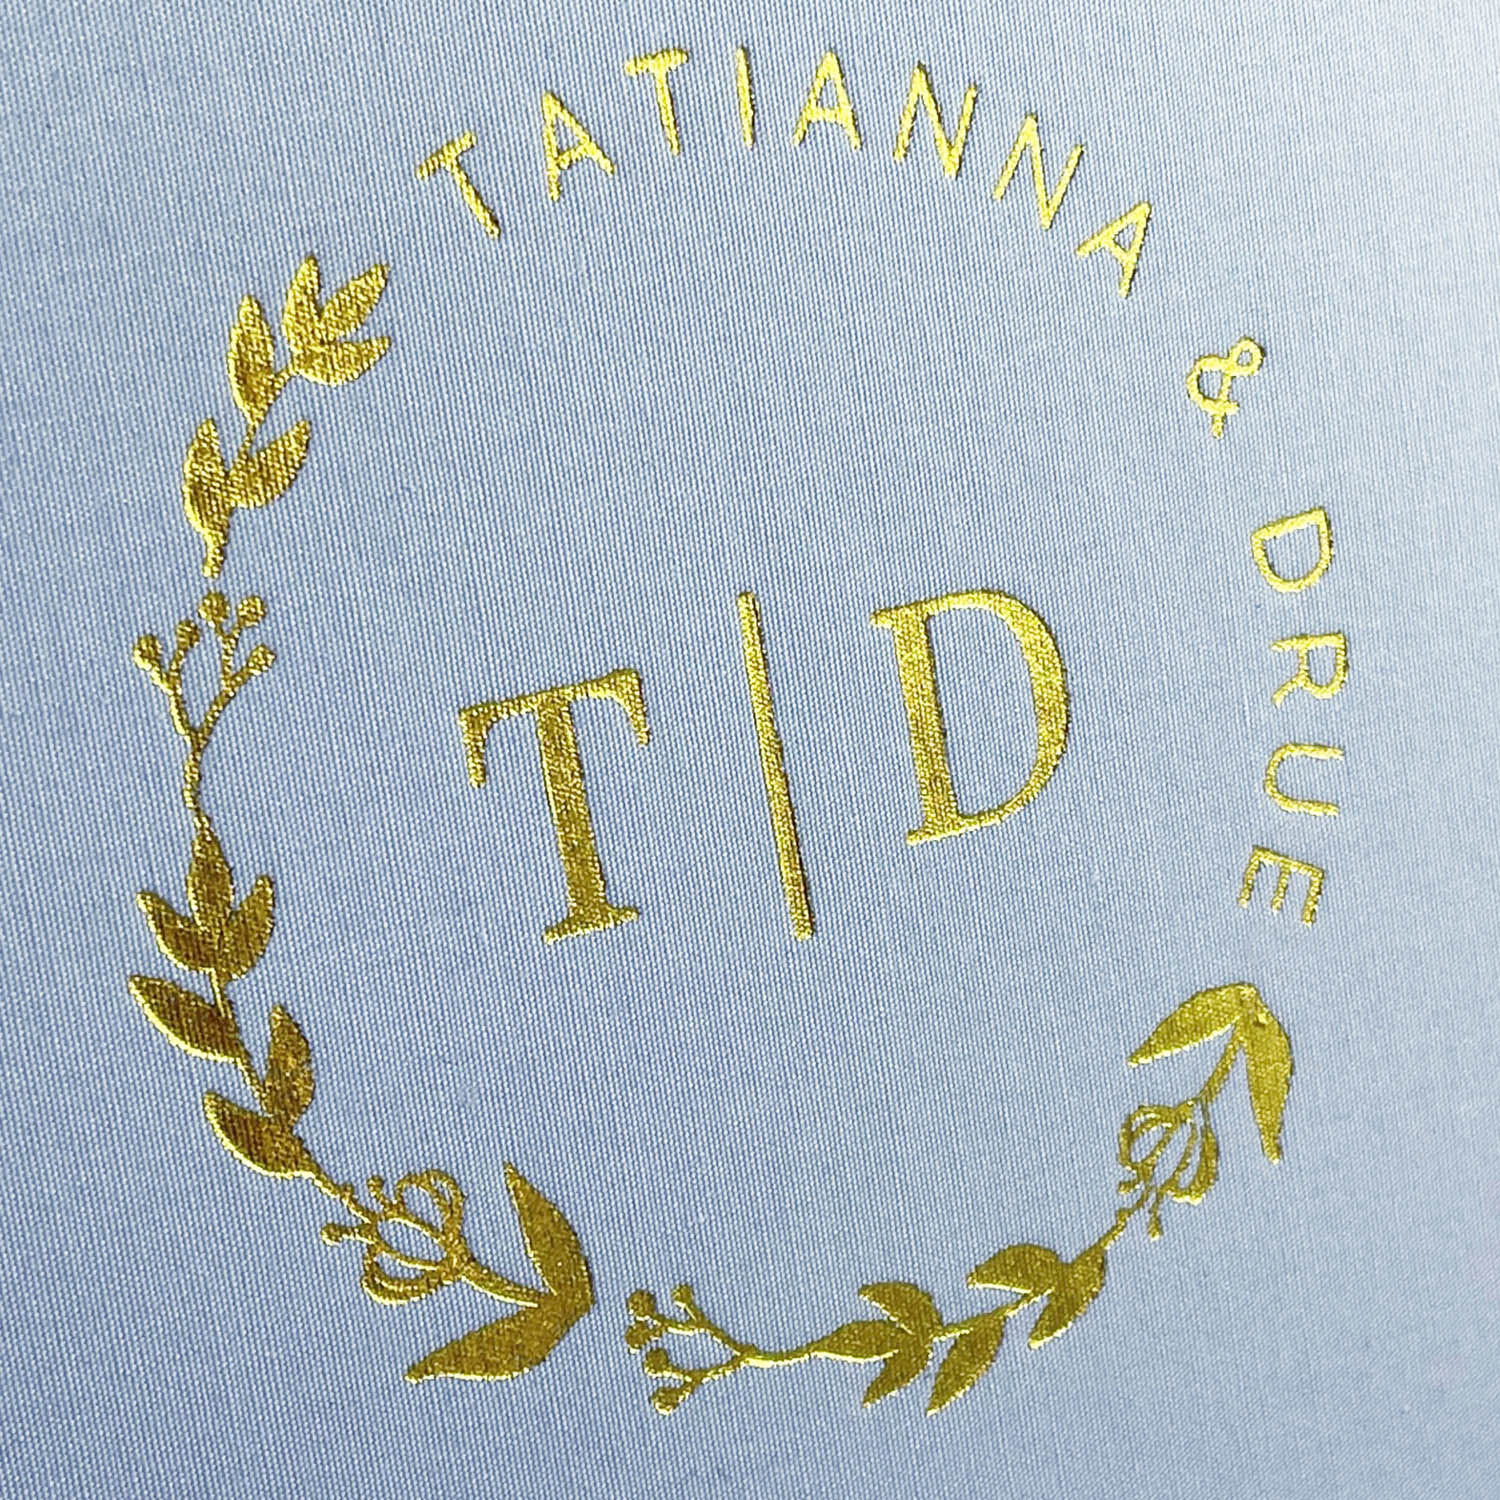 Gold foil stamped crest on linen fabric